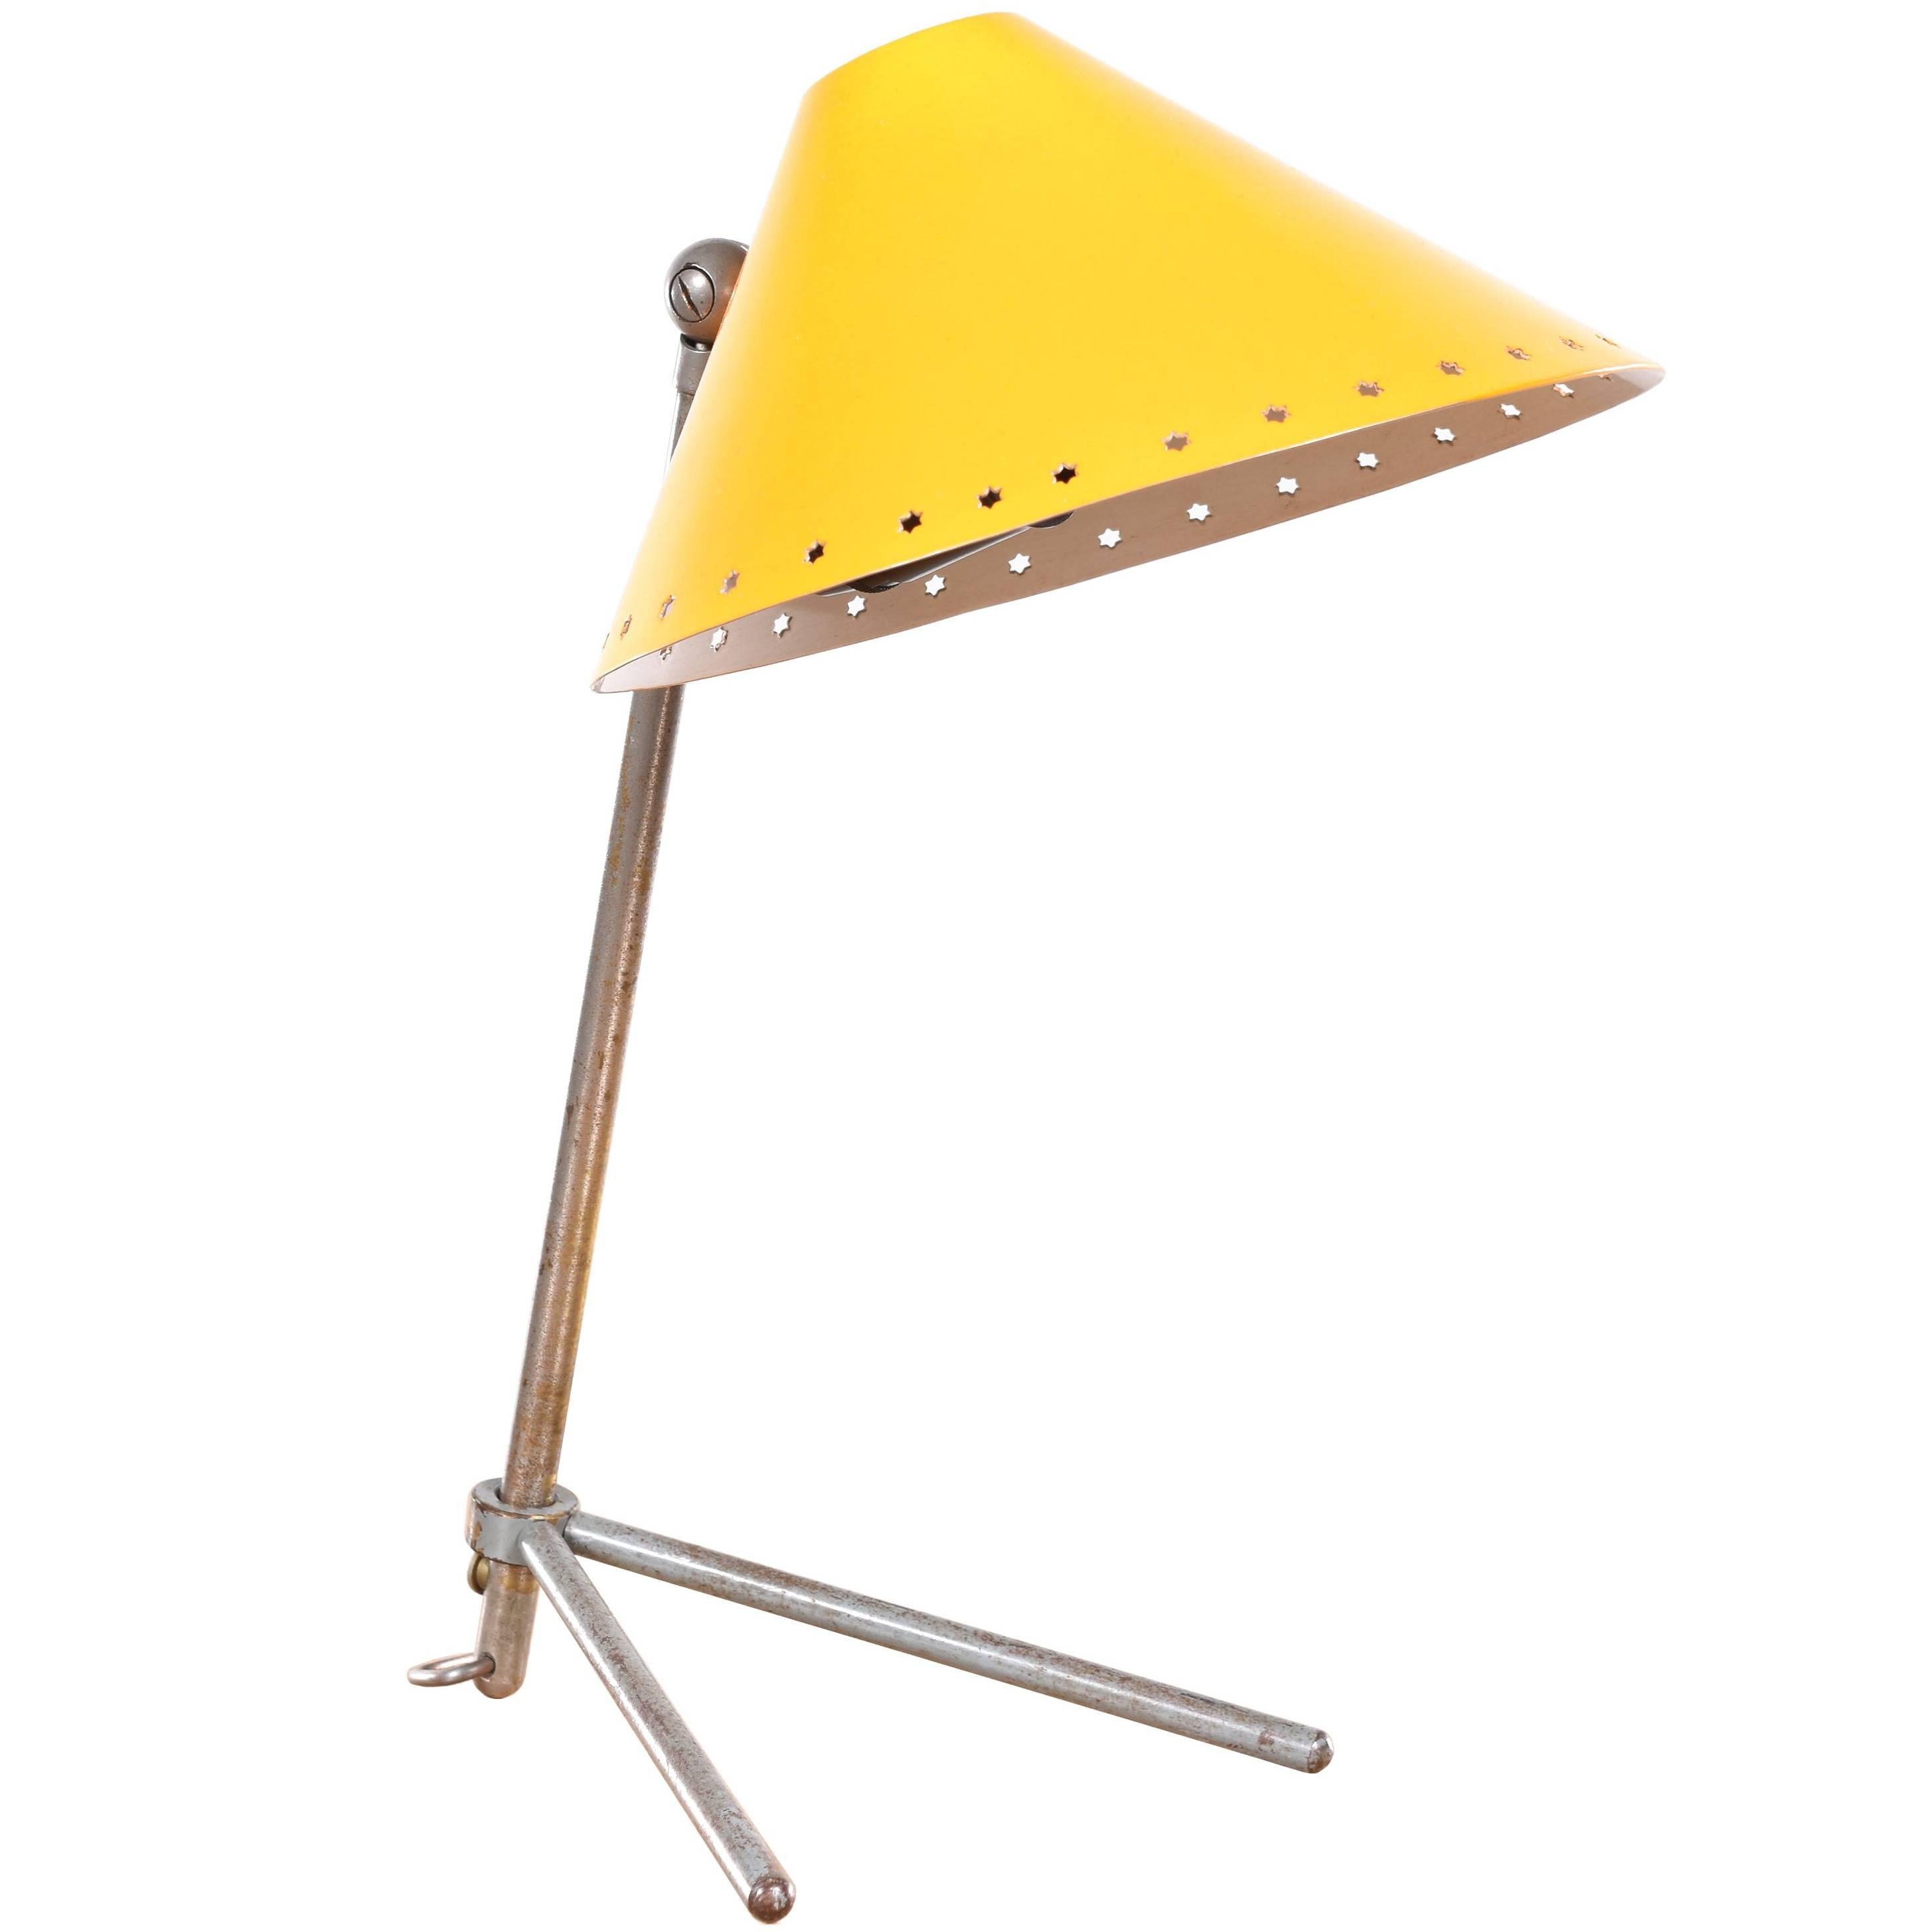 Yellow Pinocchio Lamp by H. Busquet for Hala Zeist, Netherlands